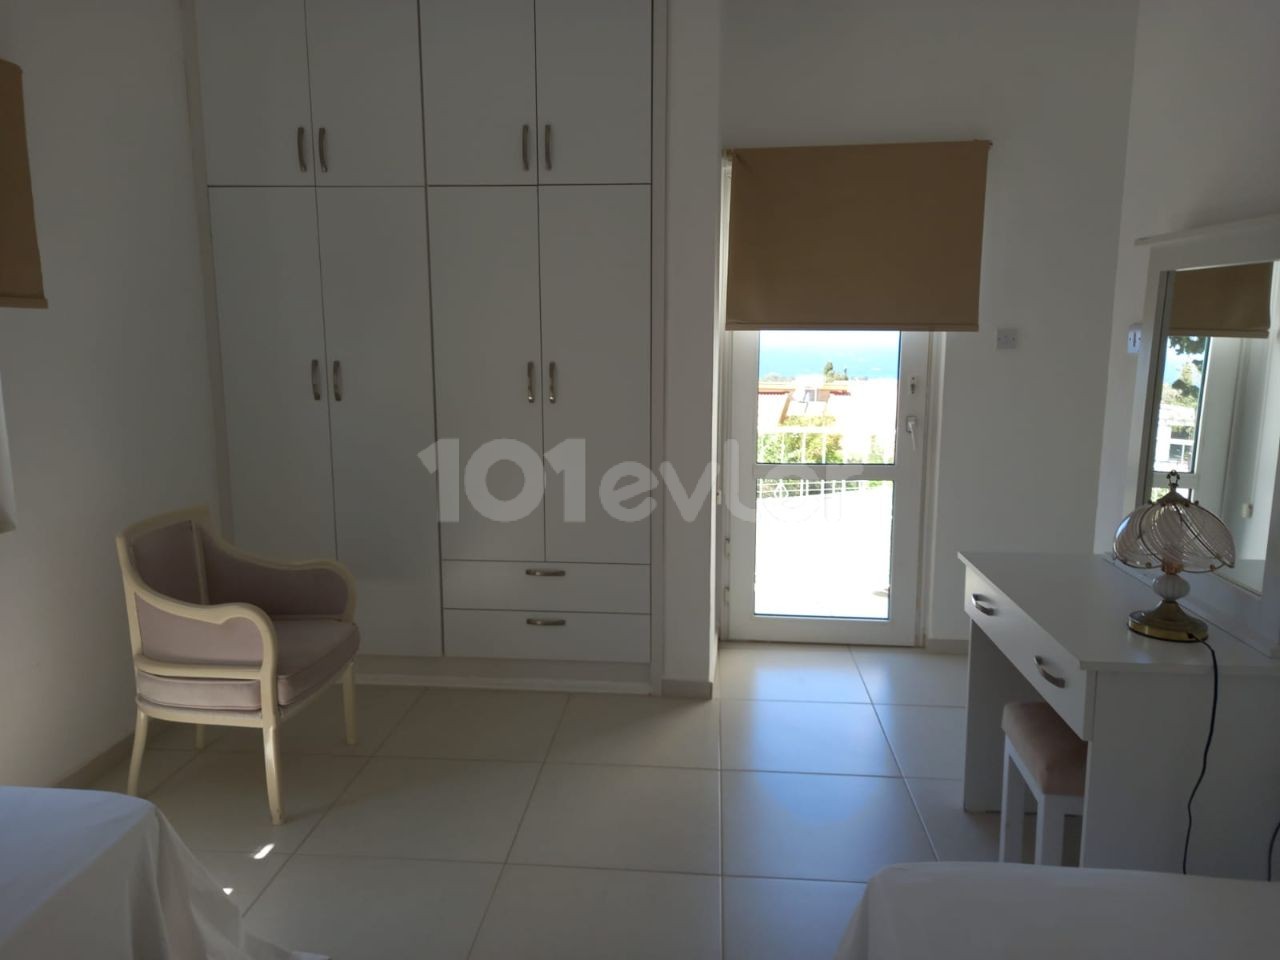 Villa for rent in the Edremit